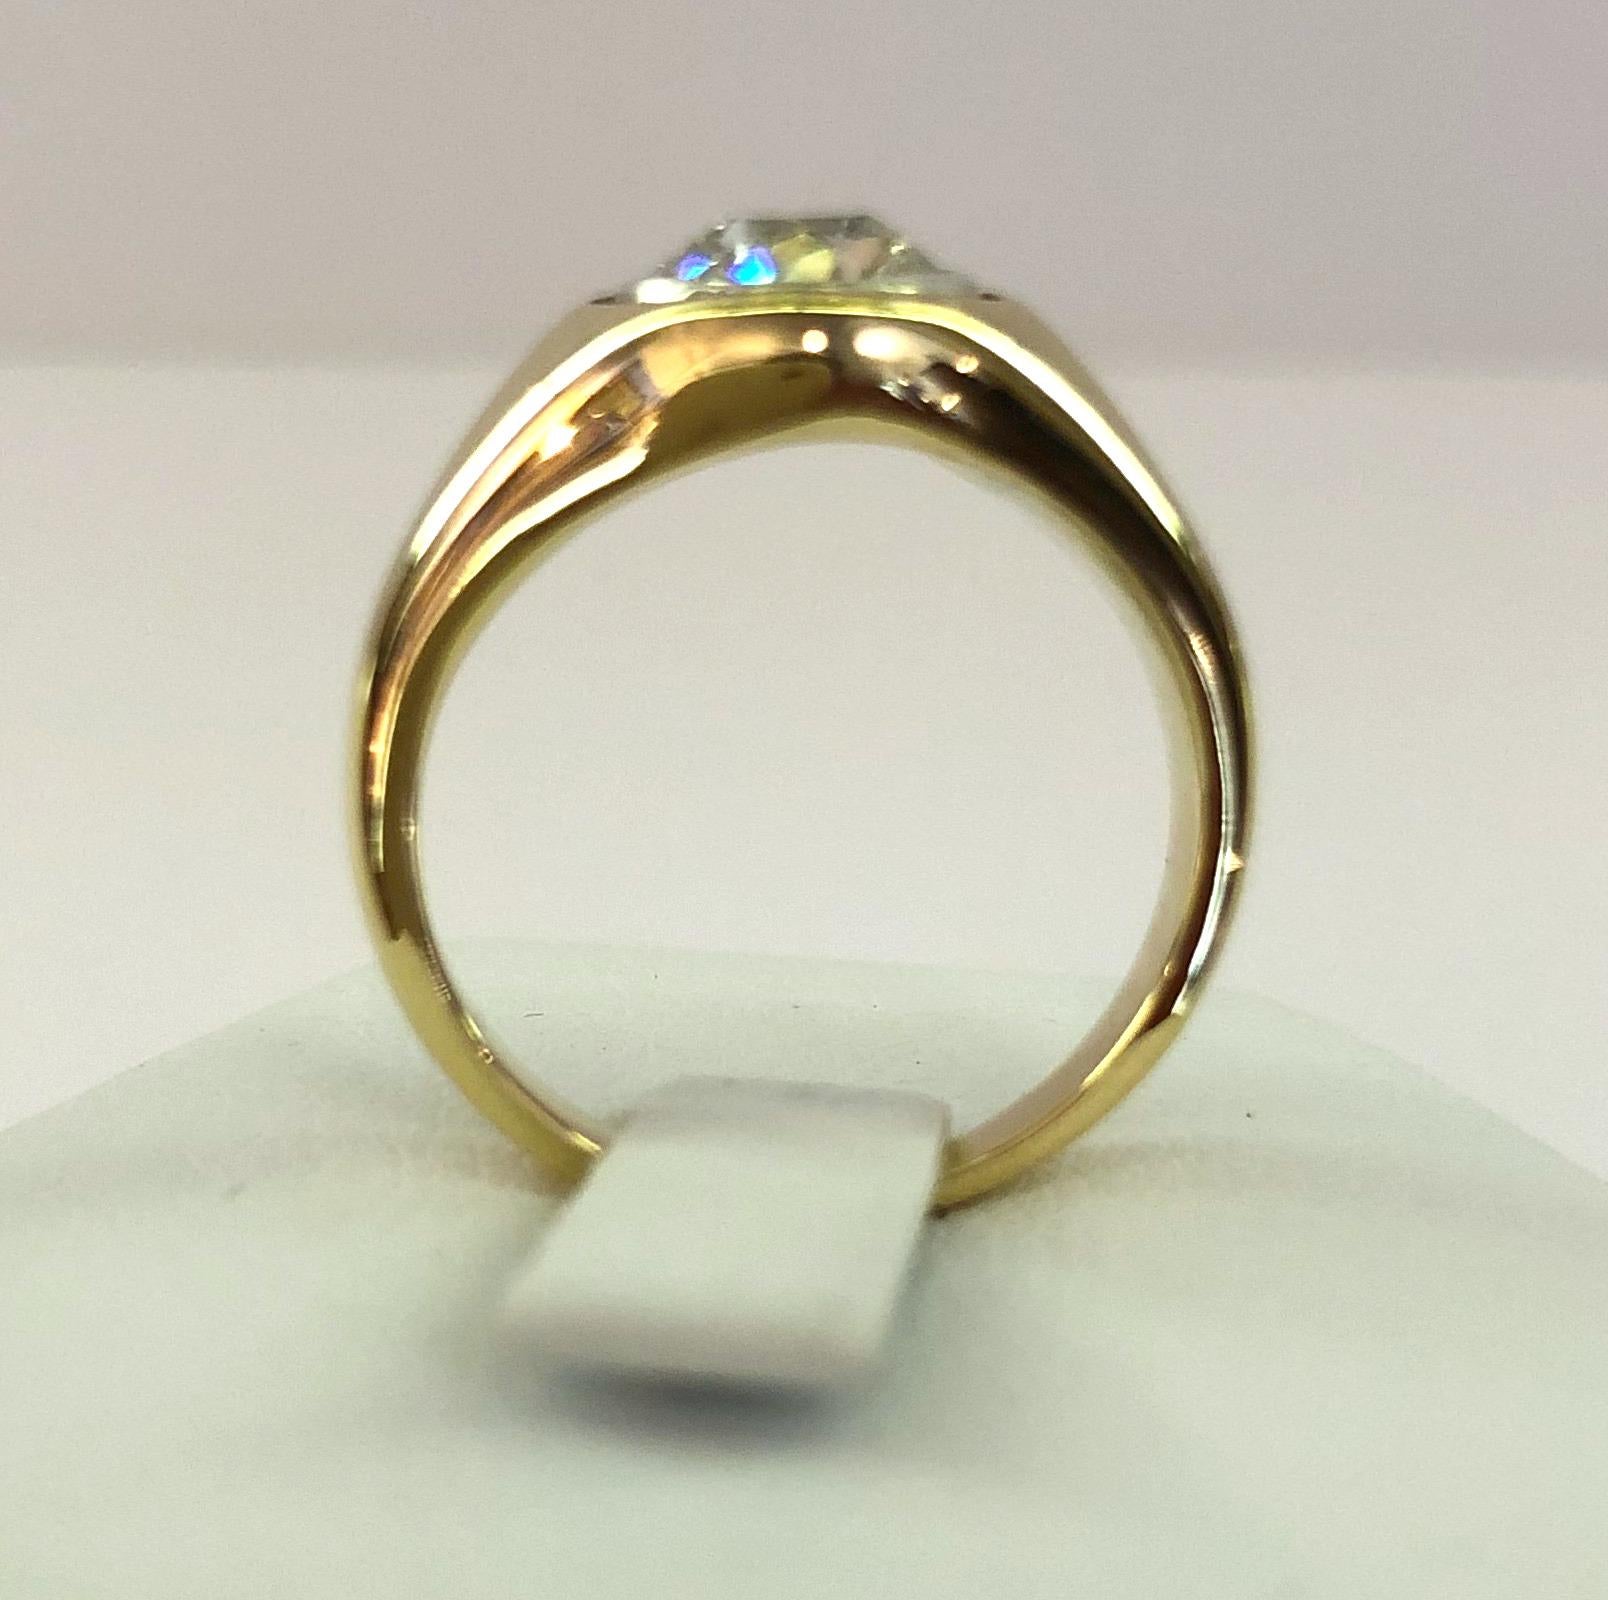 Vintage 18 karat yellow gold pinky solitaire ring with a central brilliant diamond of 0.7 karats, Italy 1930-1950s
Ring size US 4.5